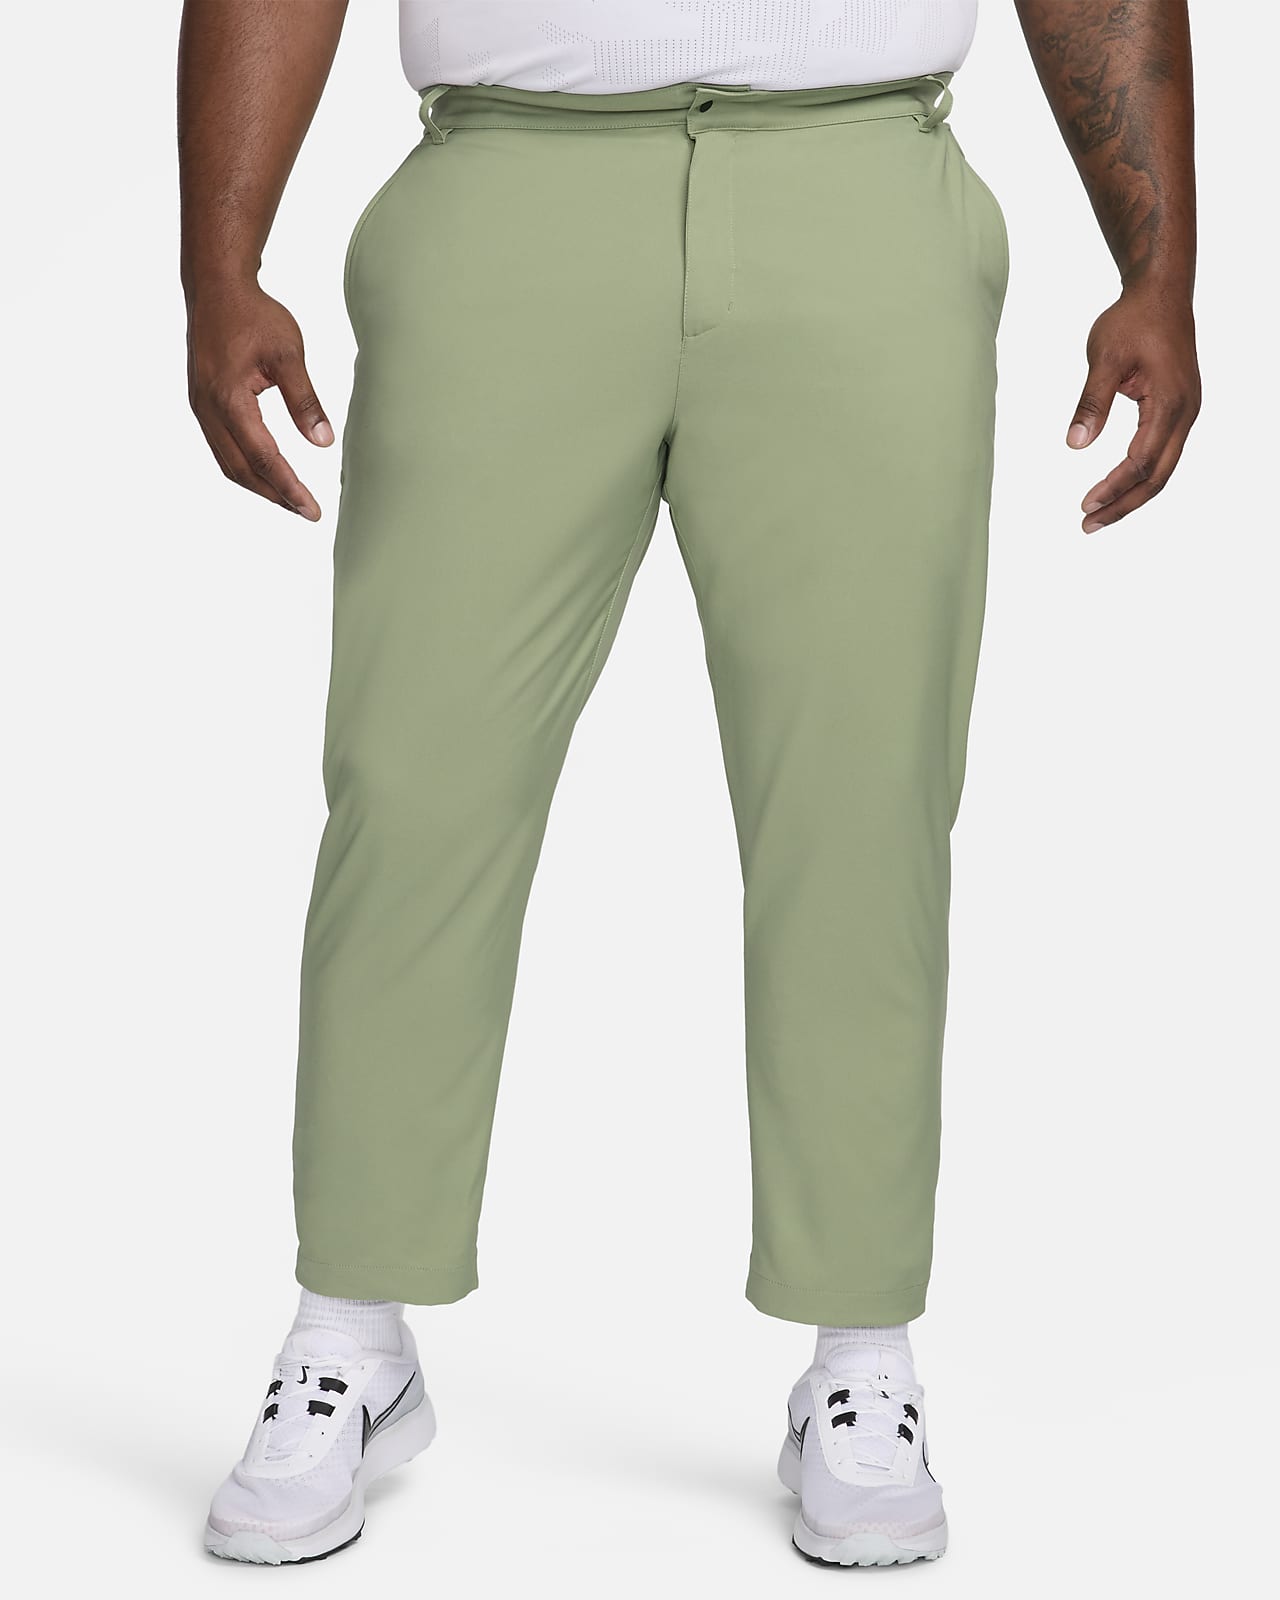 Nike Golf Pants, Shop The Largest Collection